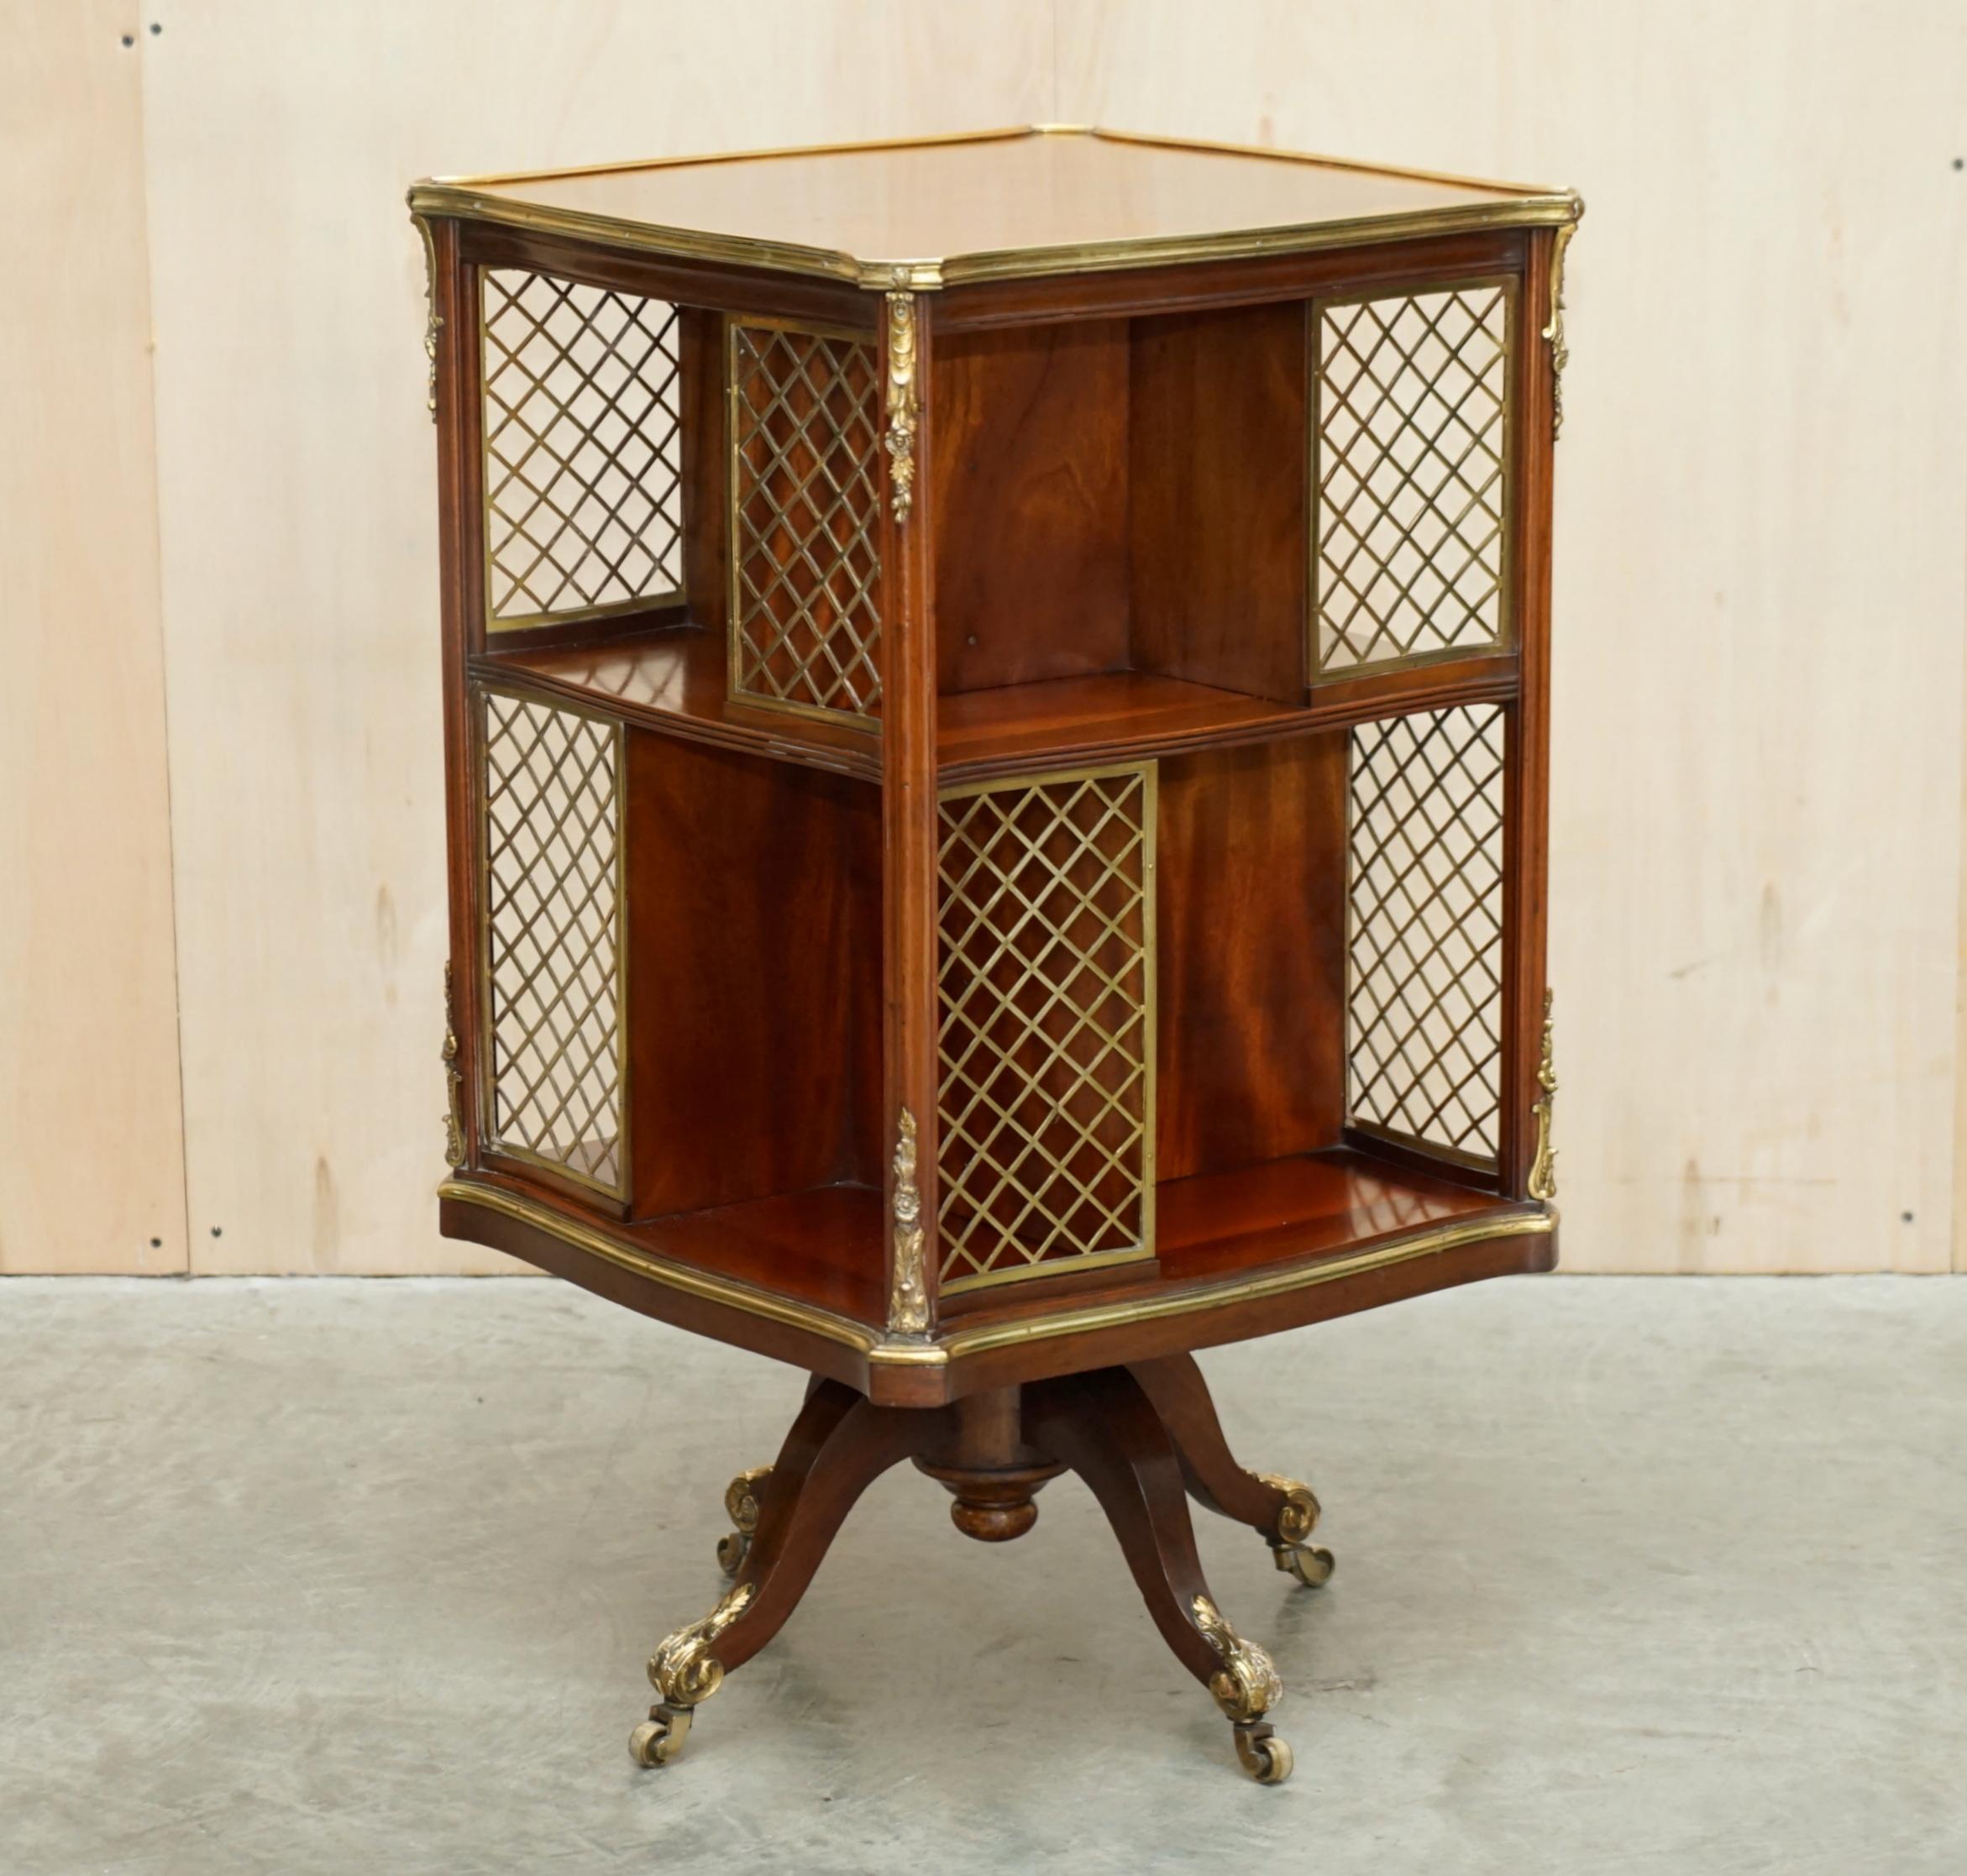 We are delighted to offer for sale this important, fully restored original Regency circa 1810-1820 brass and walnut revolving book table of museum quality

This is the finest quality book table in the world, it literally belongs in a museum, I